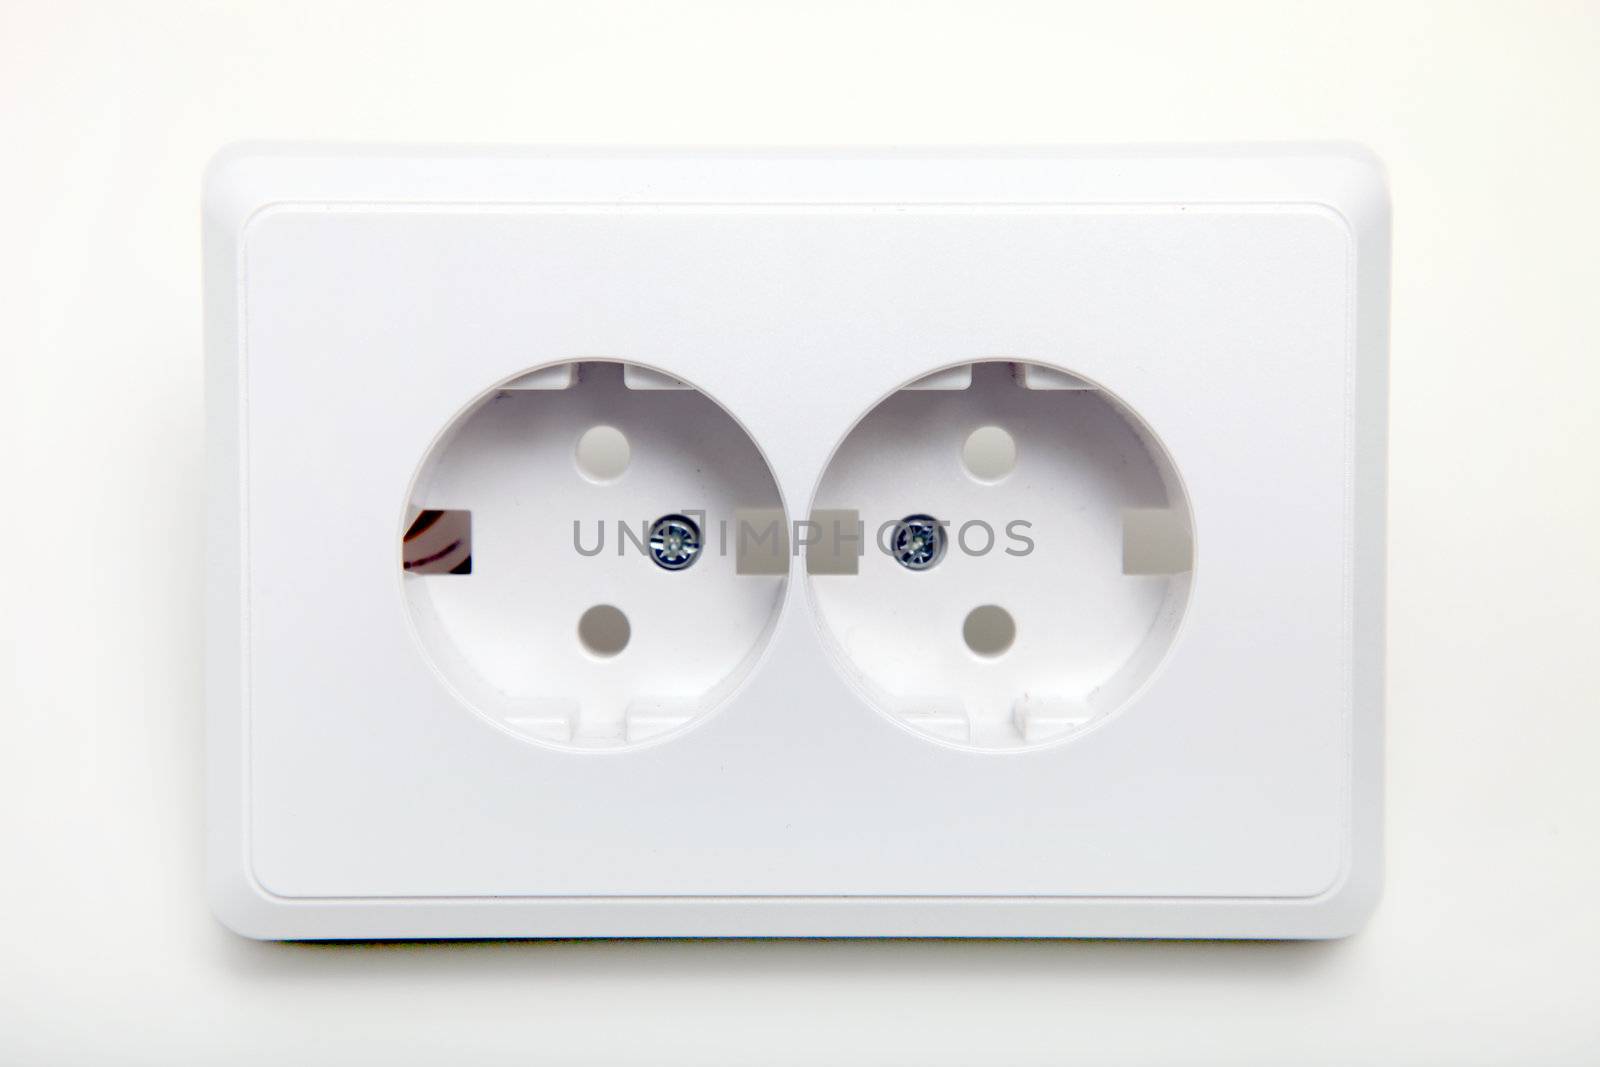 Dual plastic power sockets or outlets to connect a plug for the supply of electricity on a white background